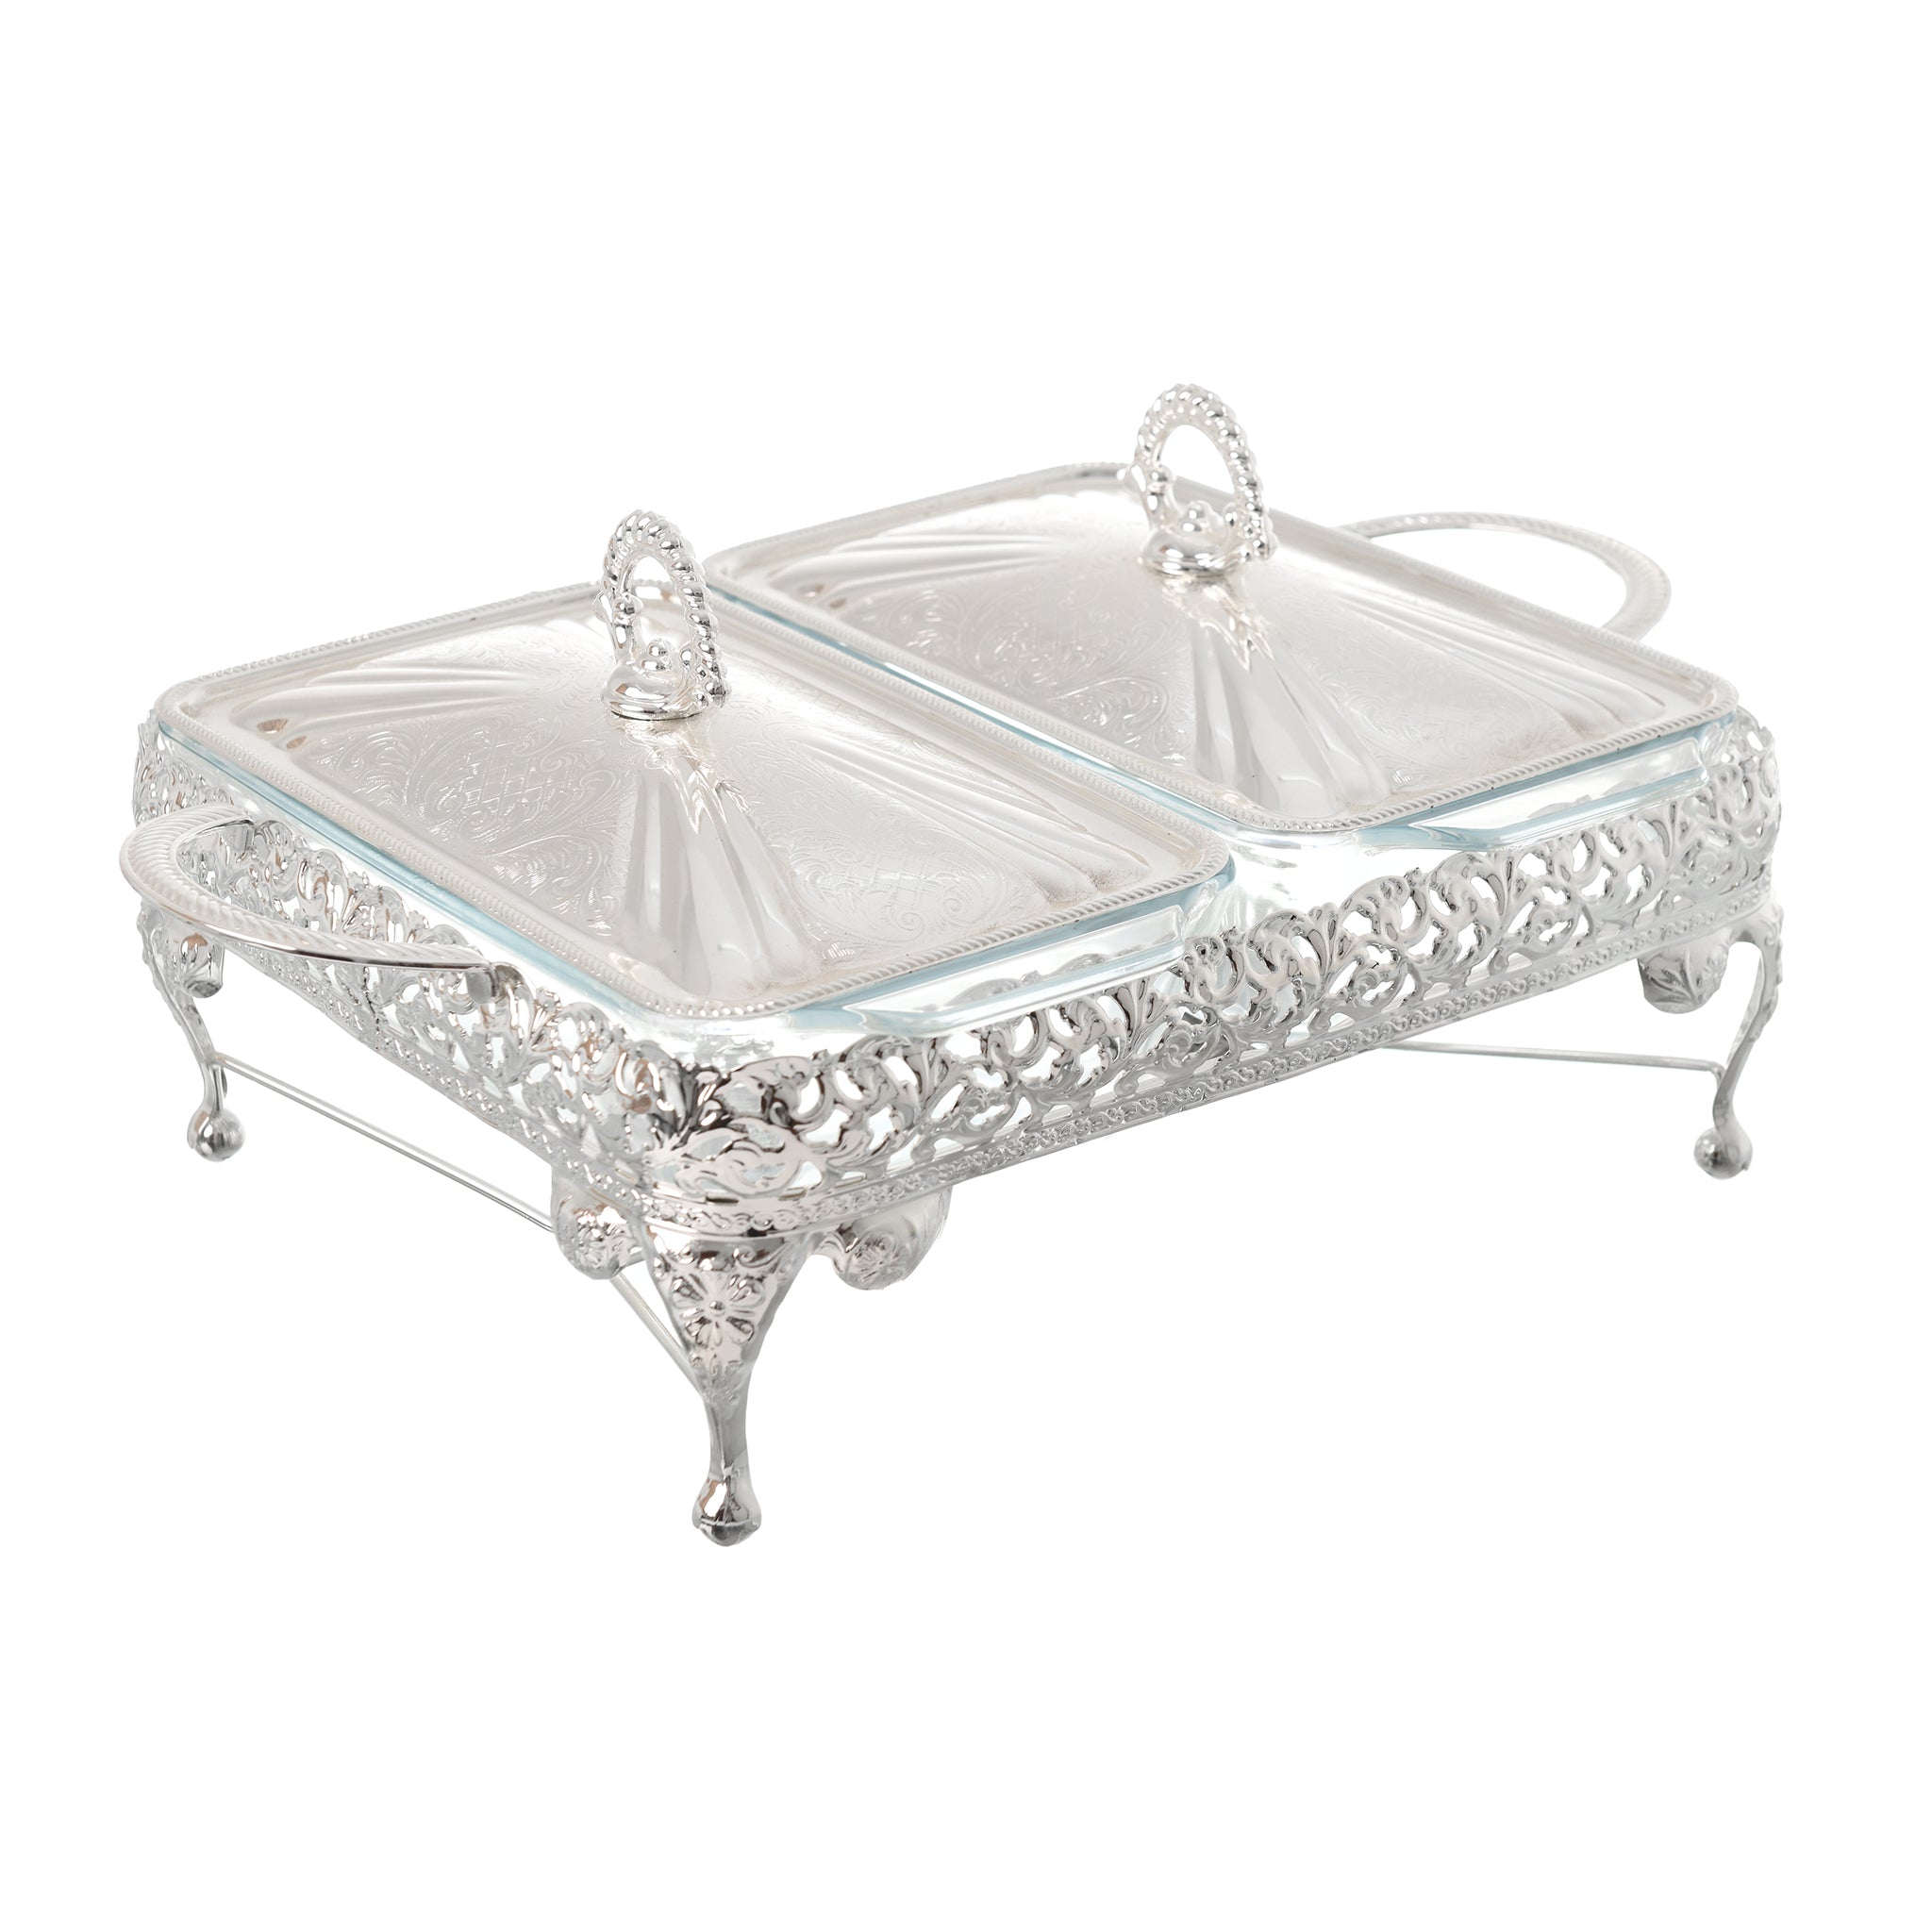 Queen Anne - 2 Rectangular Food Warmers With 2 Candles - Silver Plated & Tempered Glass - 41 x 28 x 19 cm - 26000315